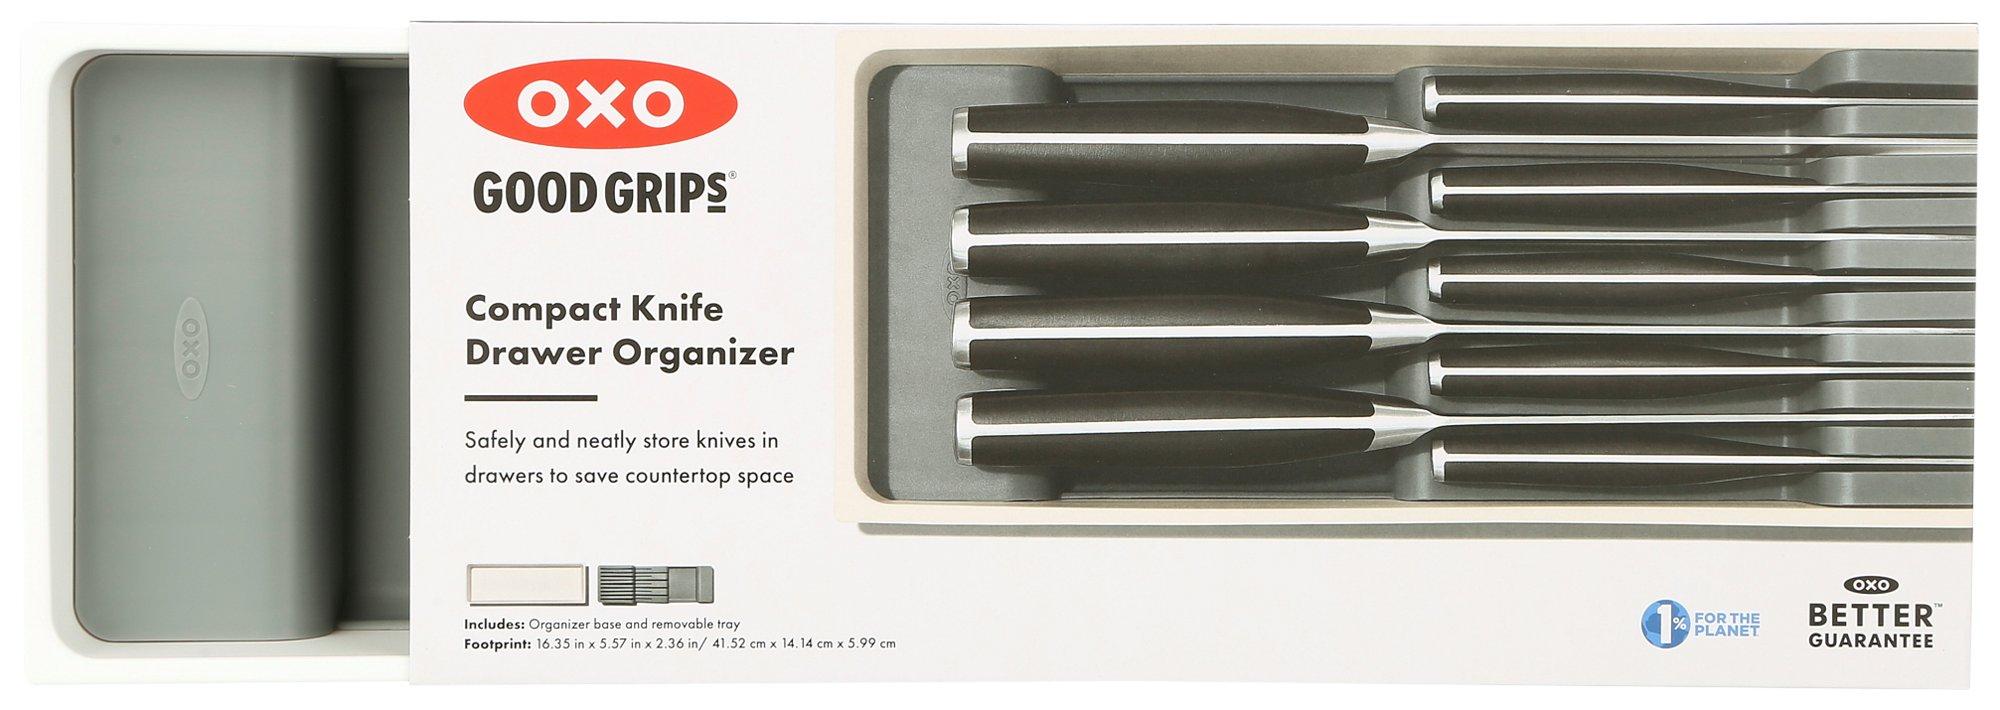 Good Grips Compact Knife Drawer Organizer